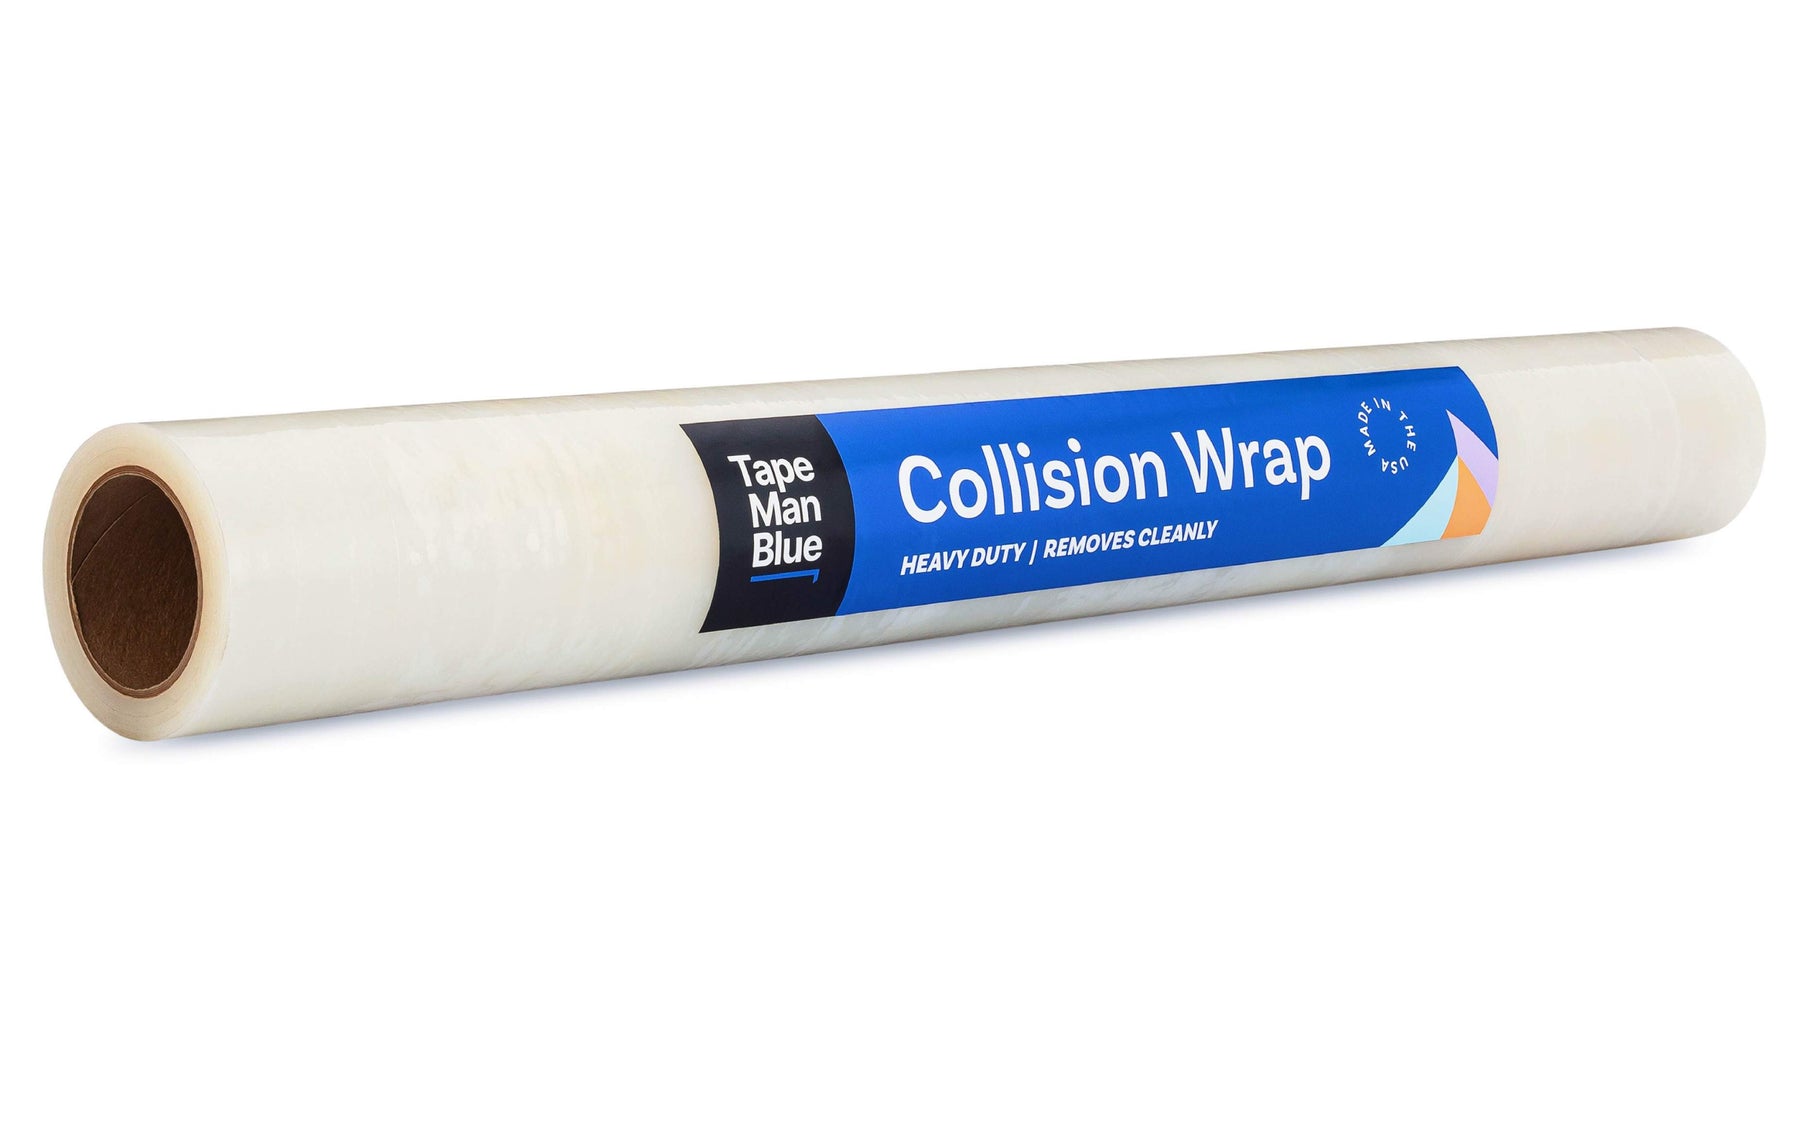 Collision Wrap - American Made, Free Shipping